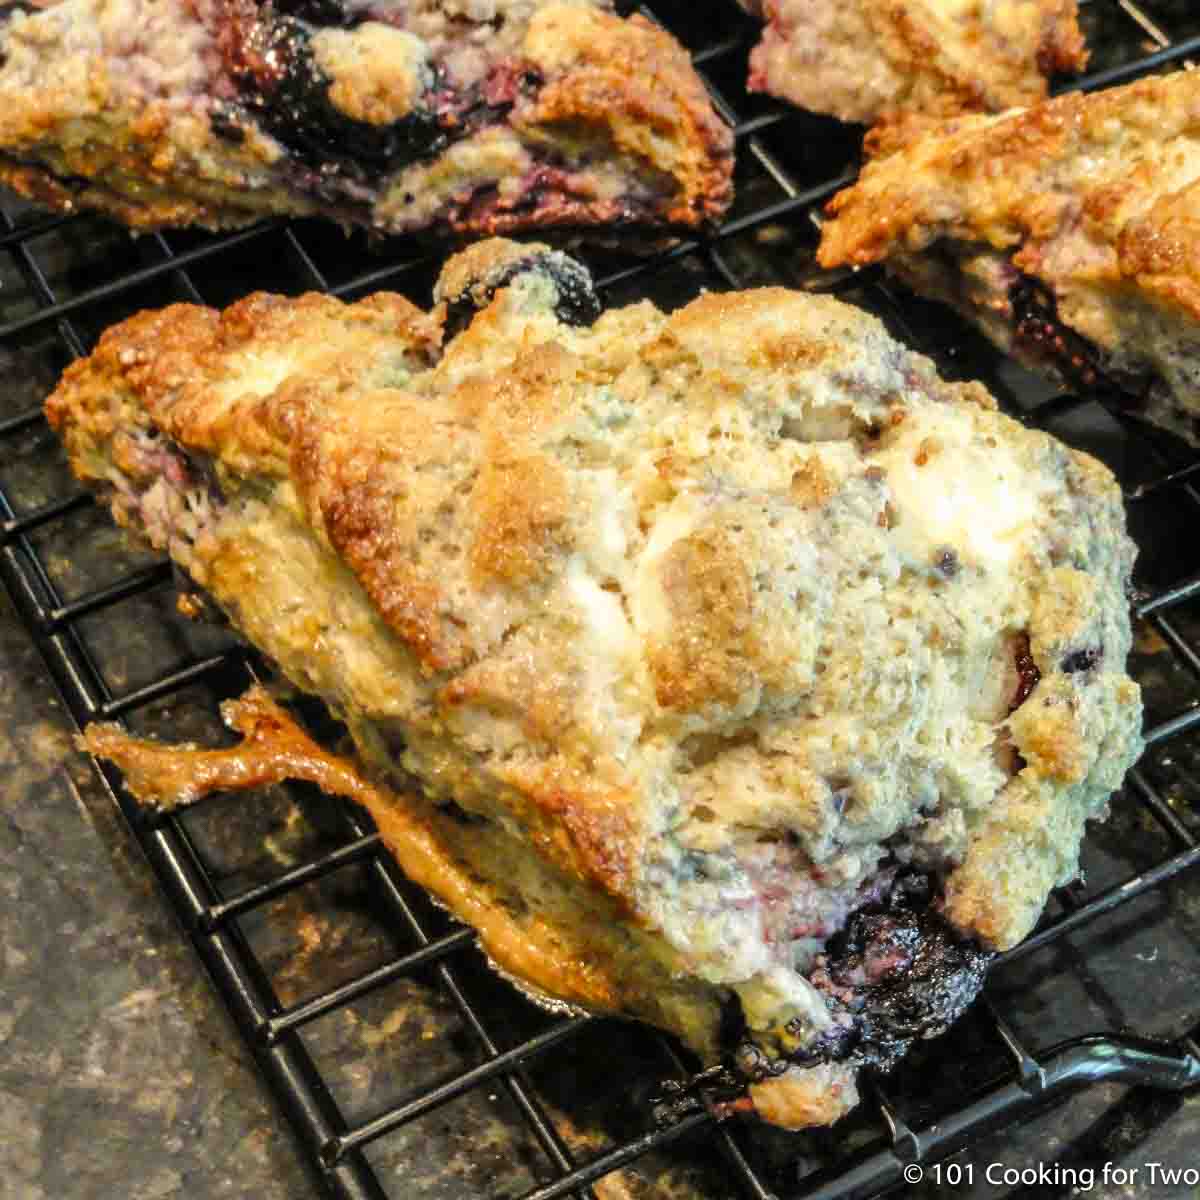 blueberry cream cheese scone on a rack.